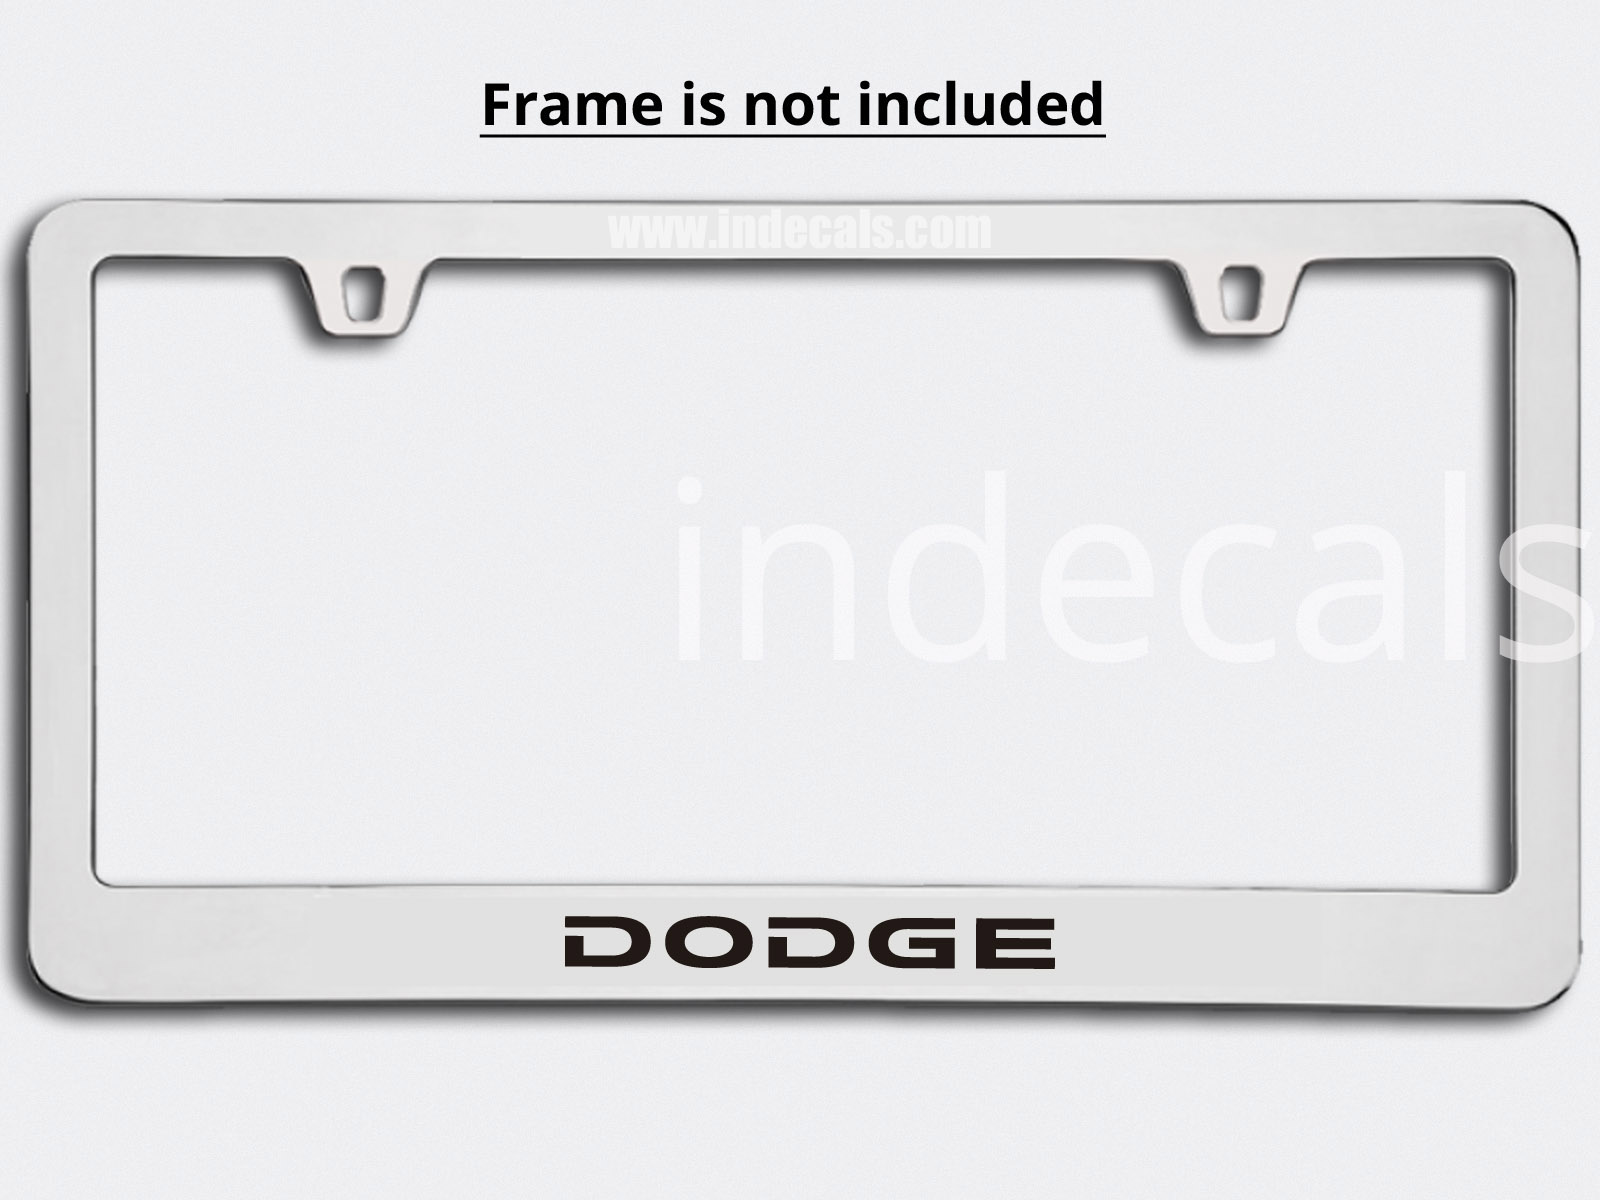 3 x Dodge Stickers for Plate Frame - Black